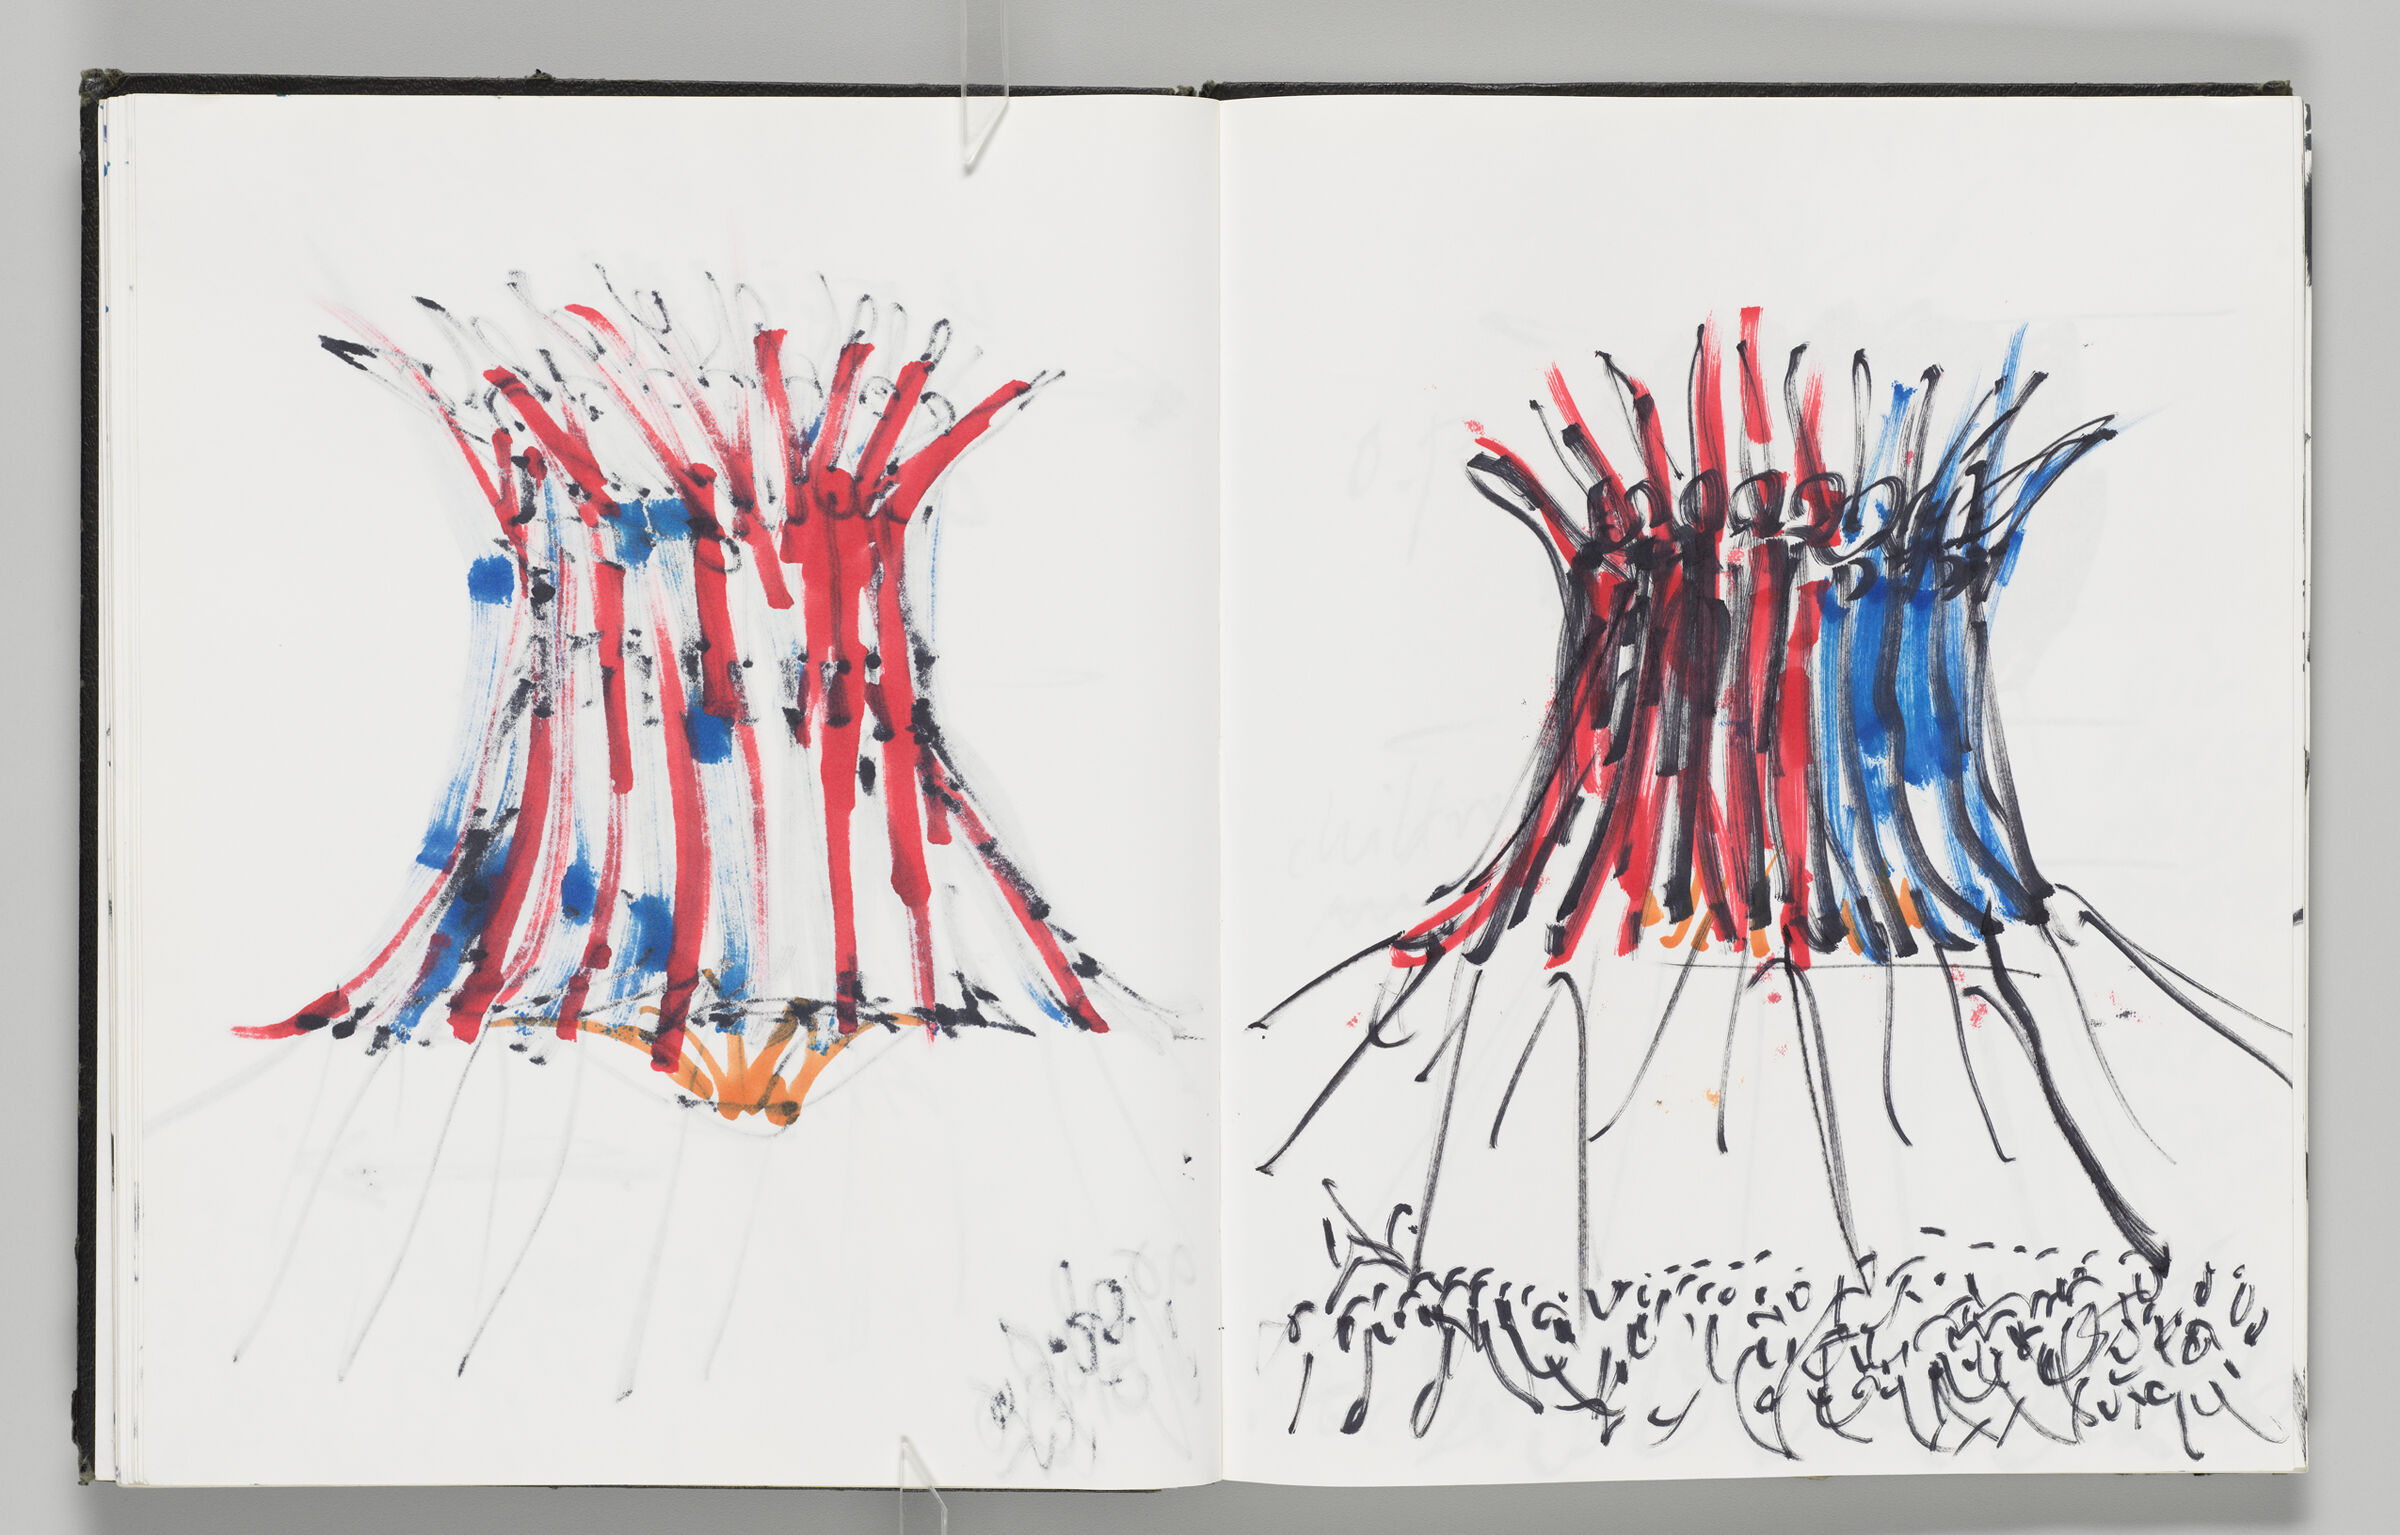 Untitled (Bleed-Through Of Previous Page, Left Page); Untitled (Inflatable In Sky With Crowd, Right Page)